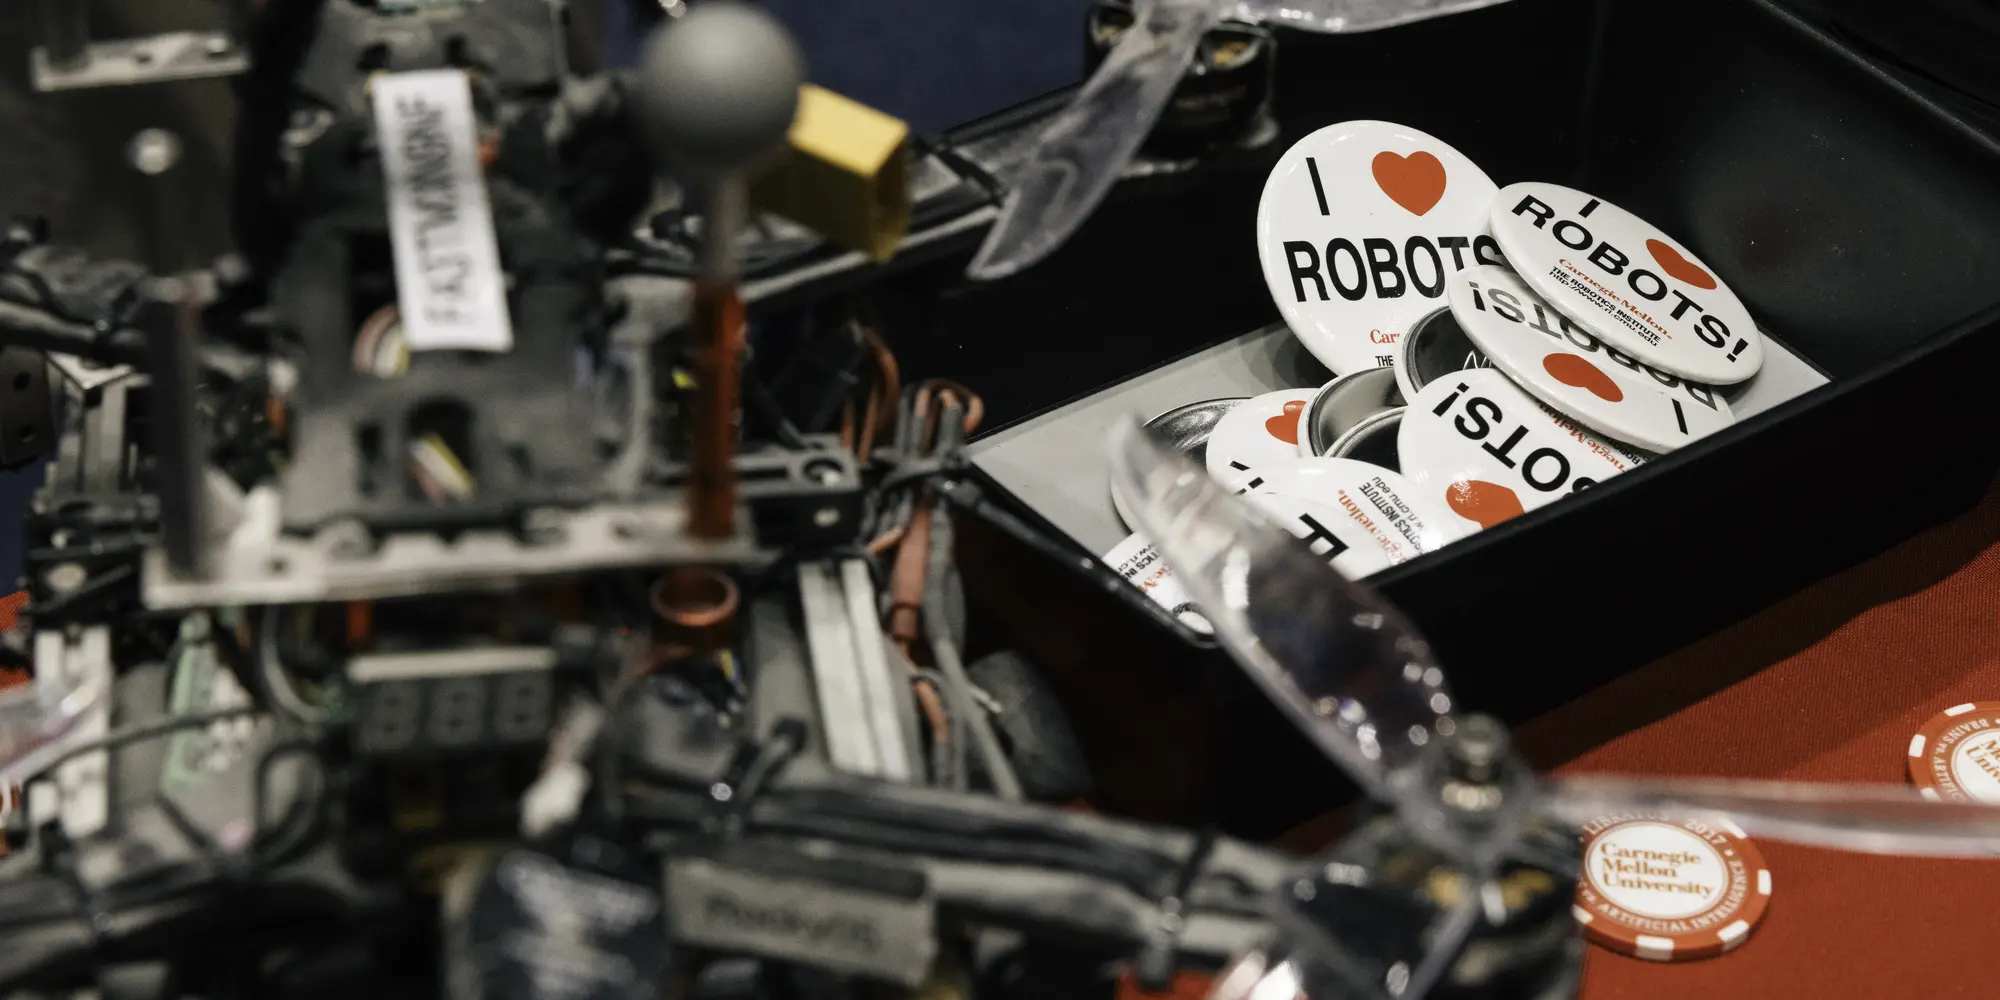 Cave exploring robot on a table next to "I Love Robots" buttons